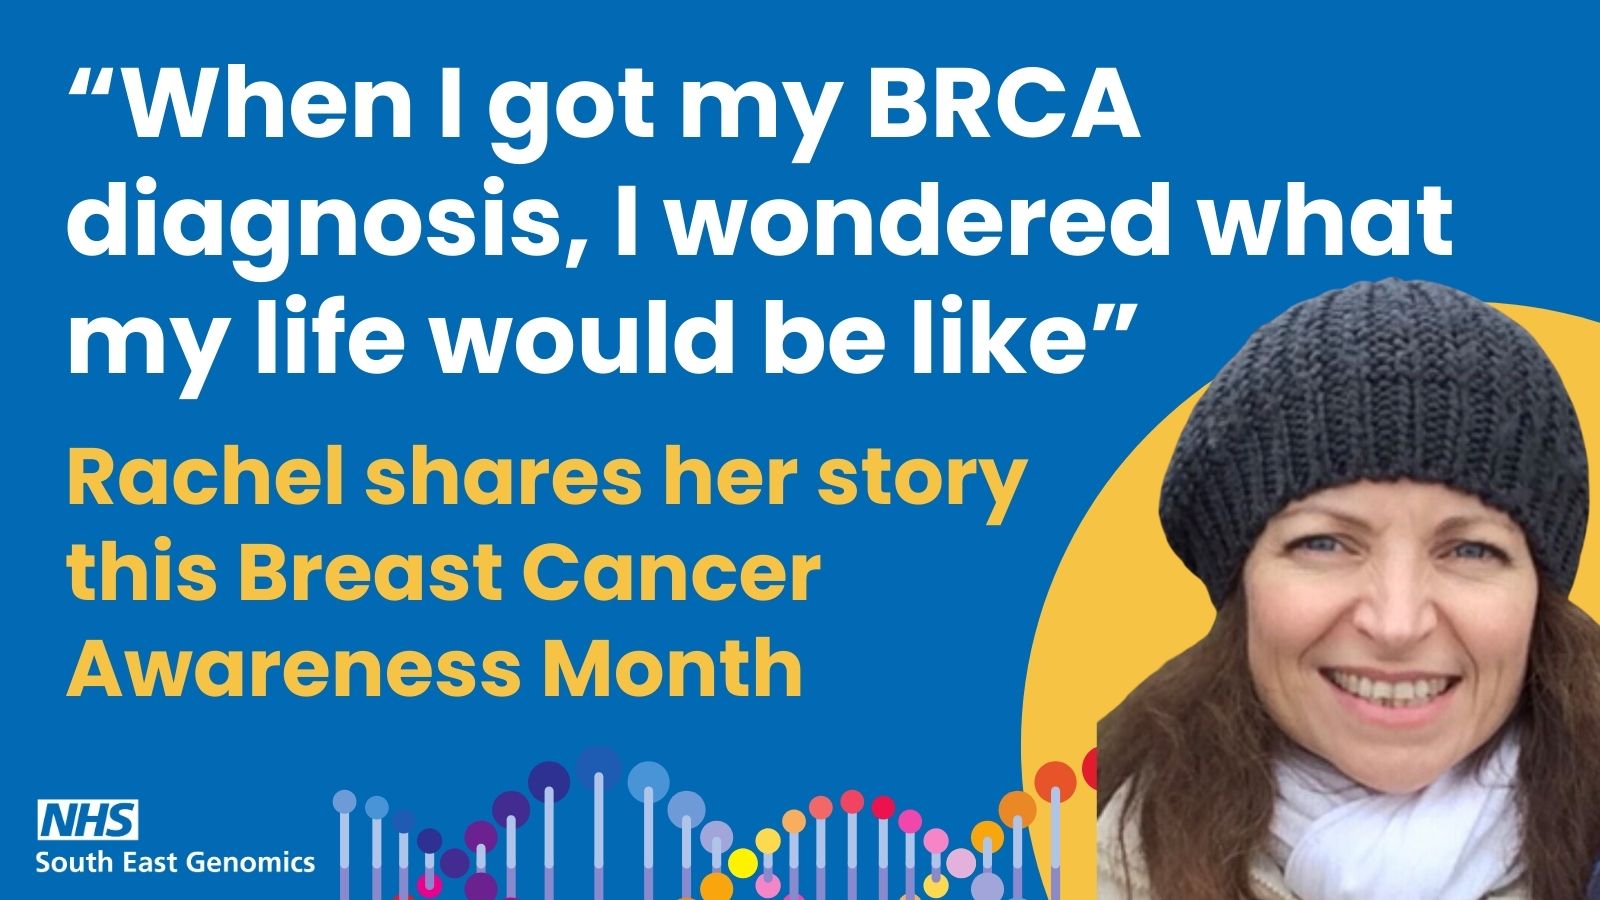 BRCA Gene: What It's Like To Test Positive For The Breast Cancer Gene